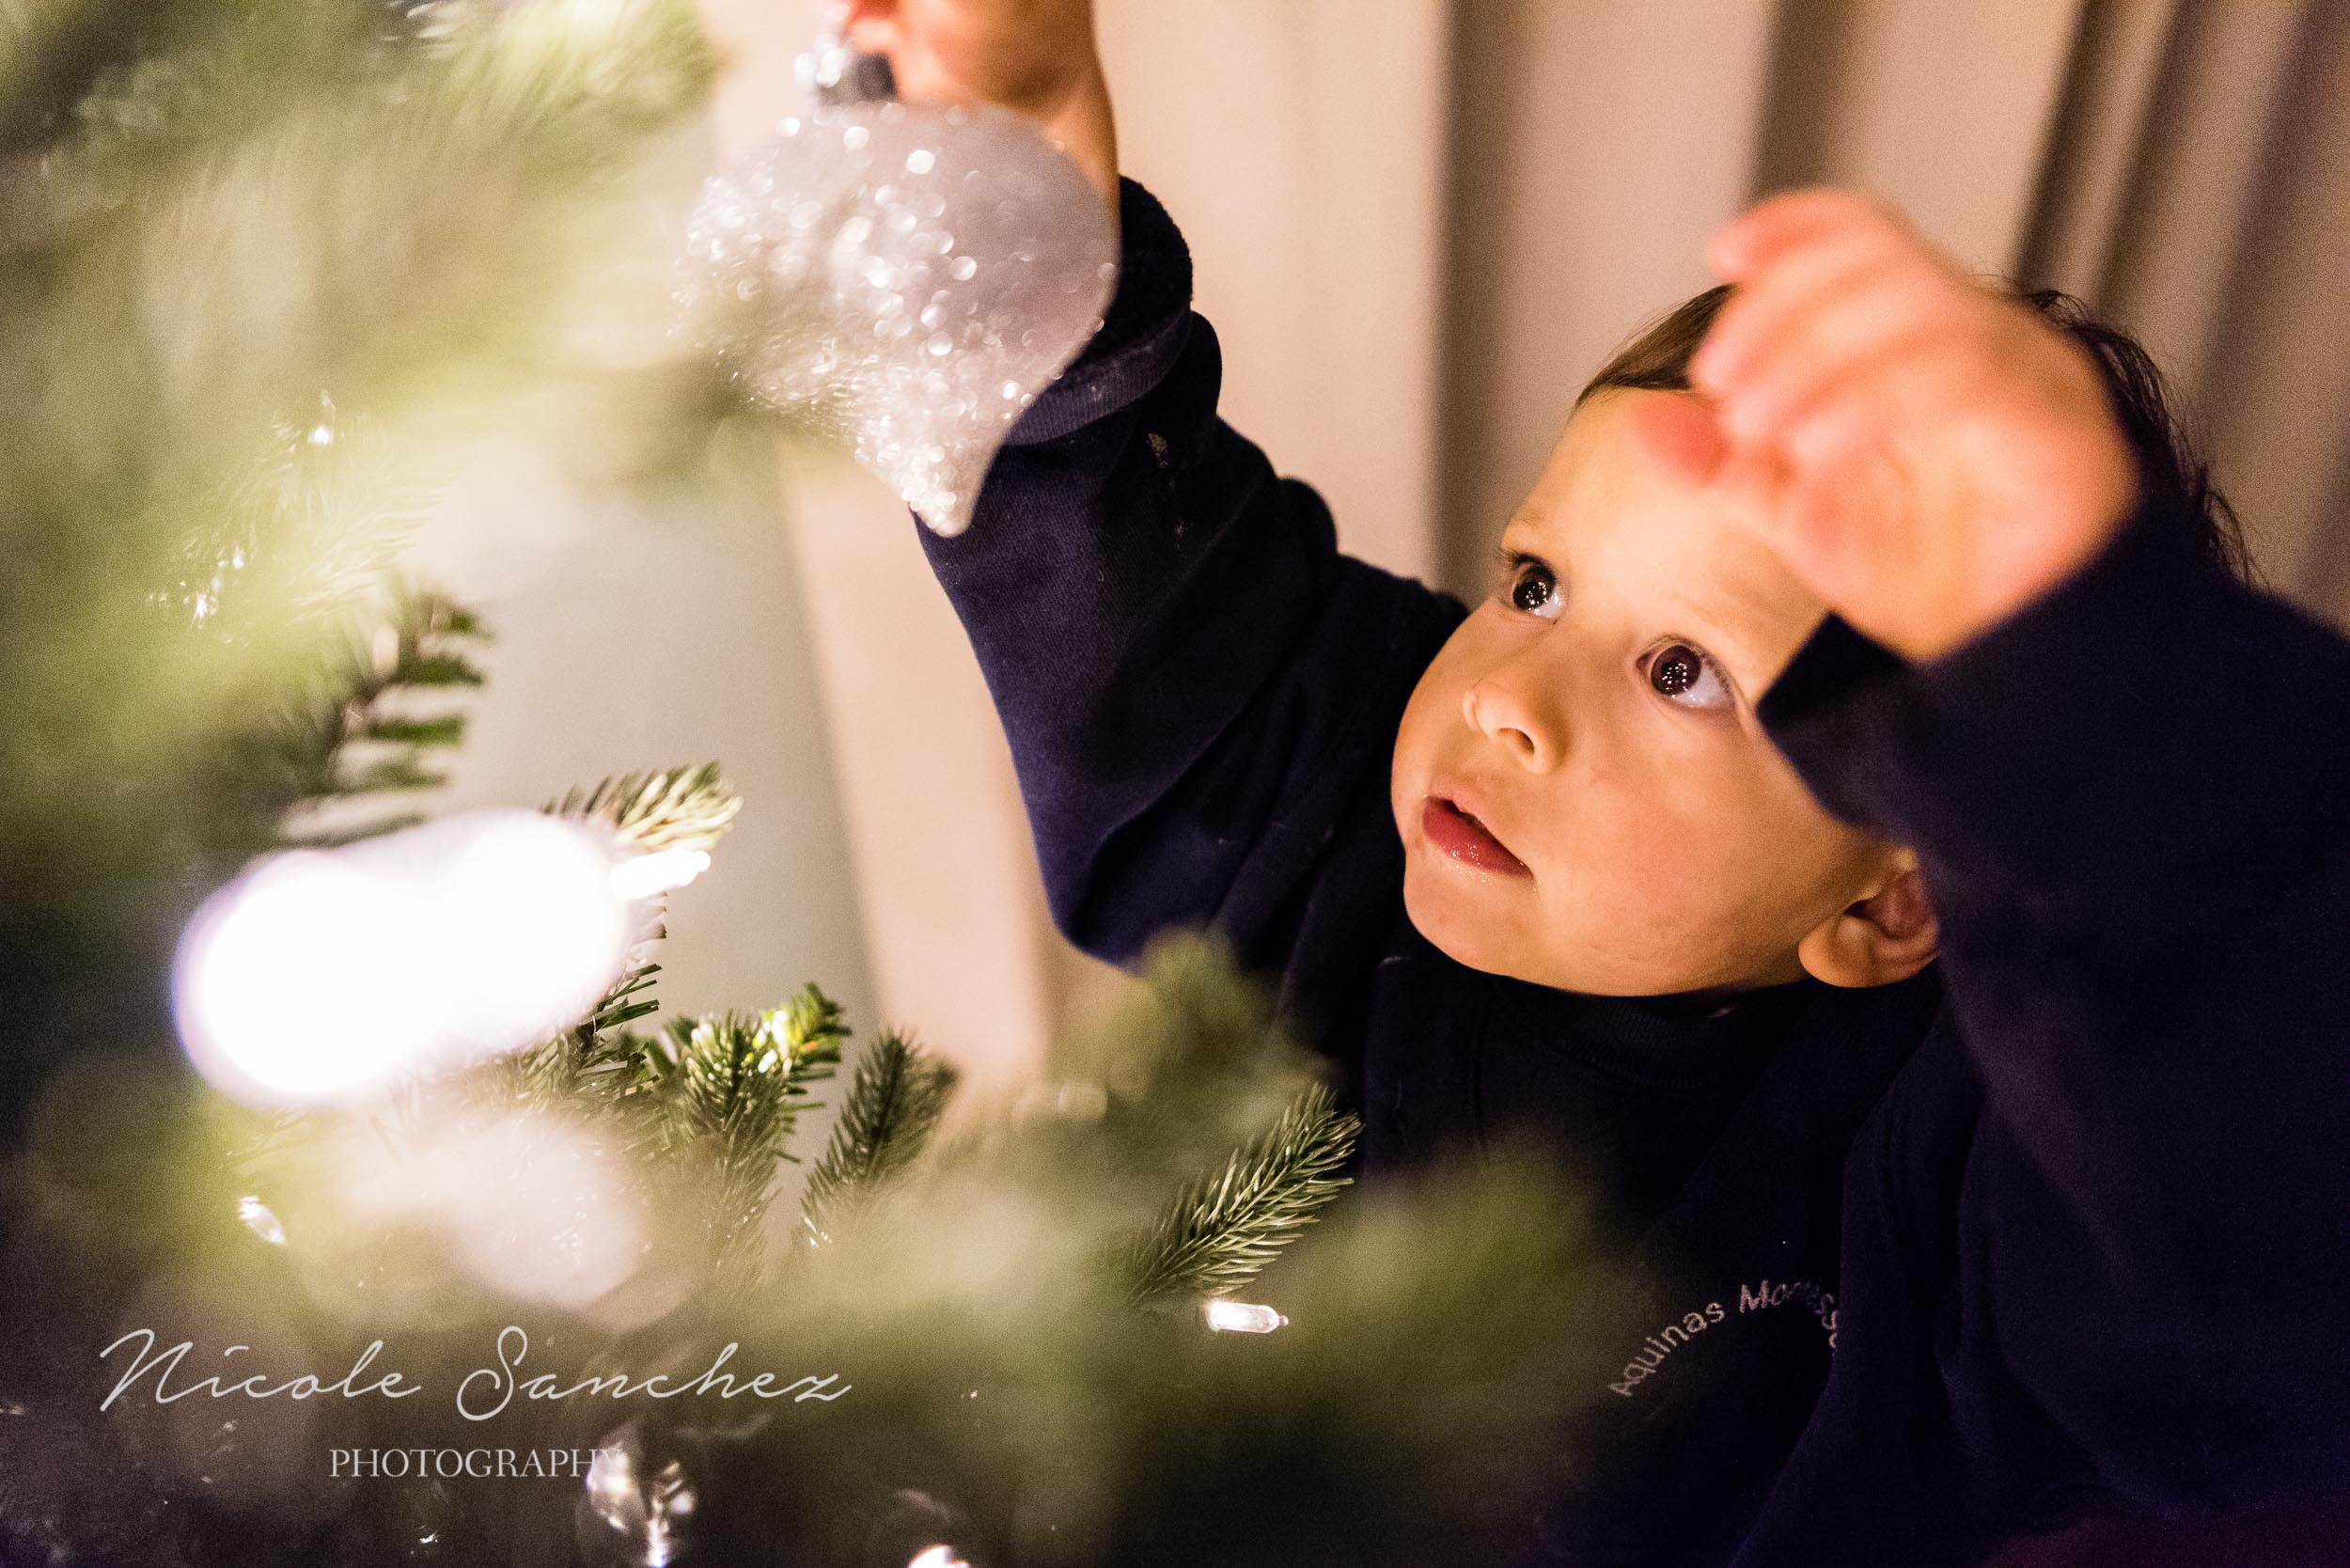 photographing-holiday-traditions-nicole-sanchez-northern-virginia-family-photographer-1-2.jpg